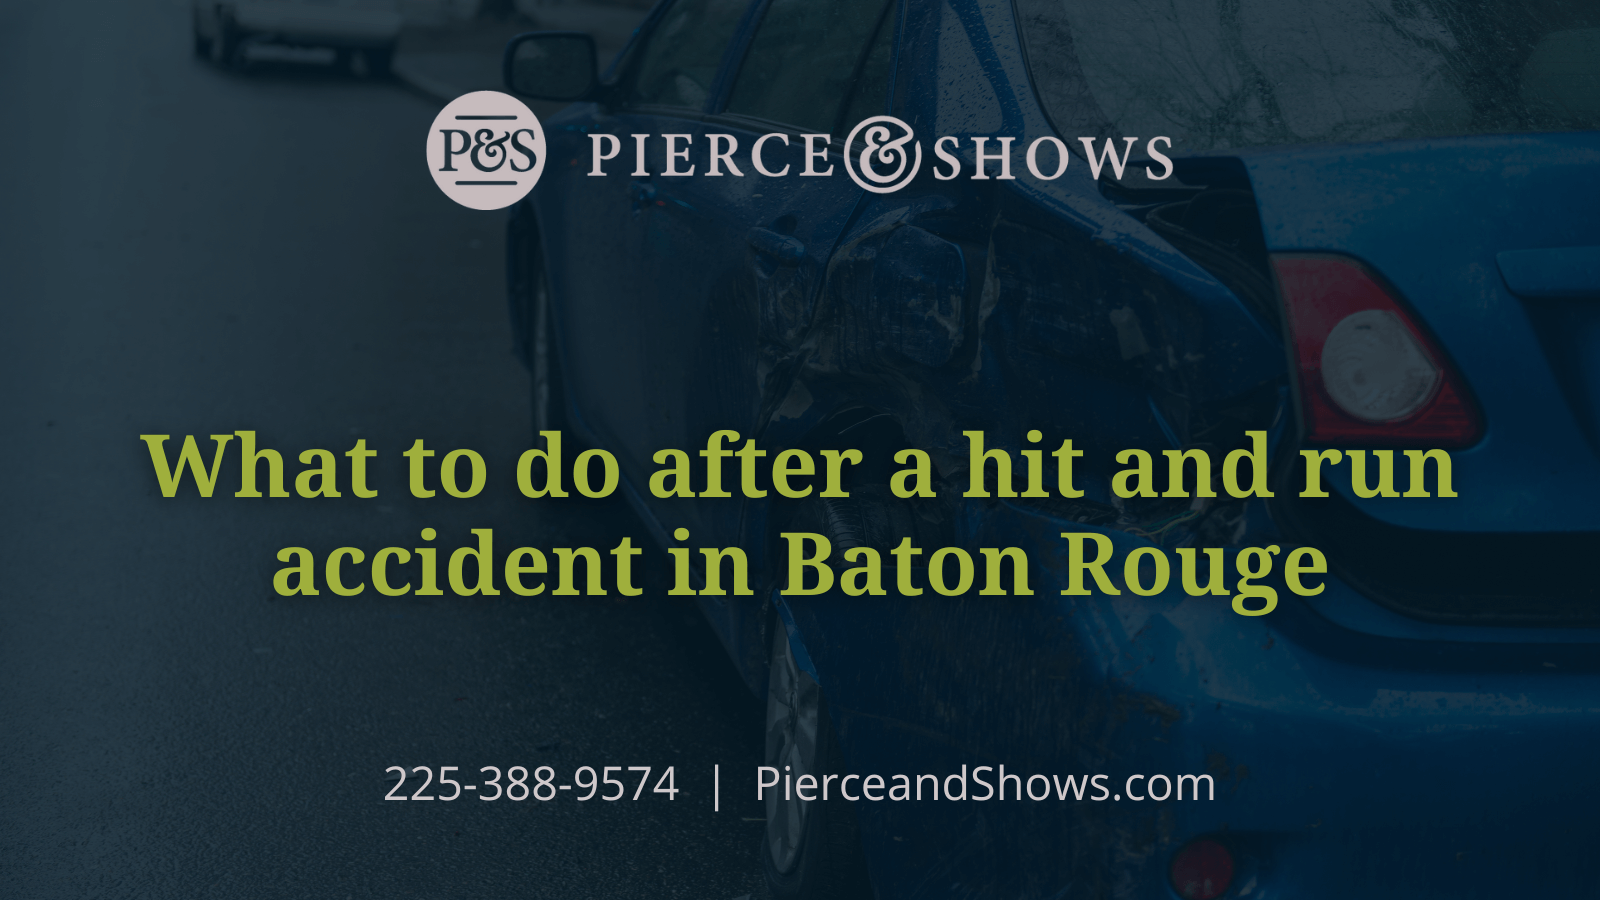 What to do after a hit and run accident in Baton Rouge - Baton Rouge Louisiana injury attorney Pierce & Shows